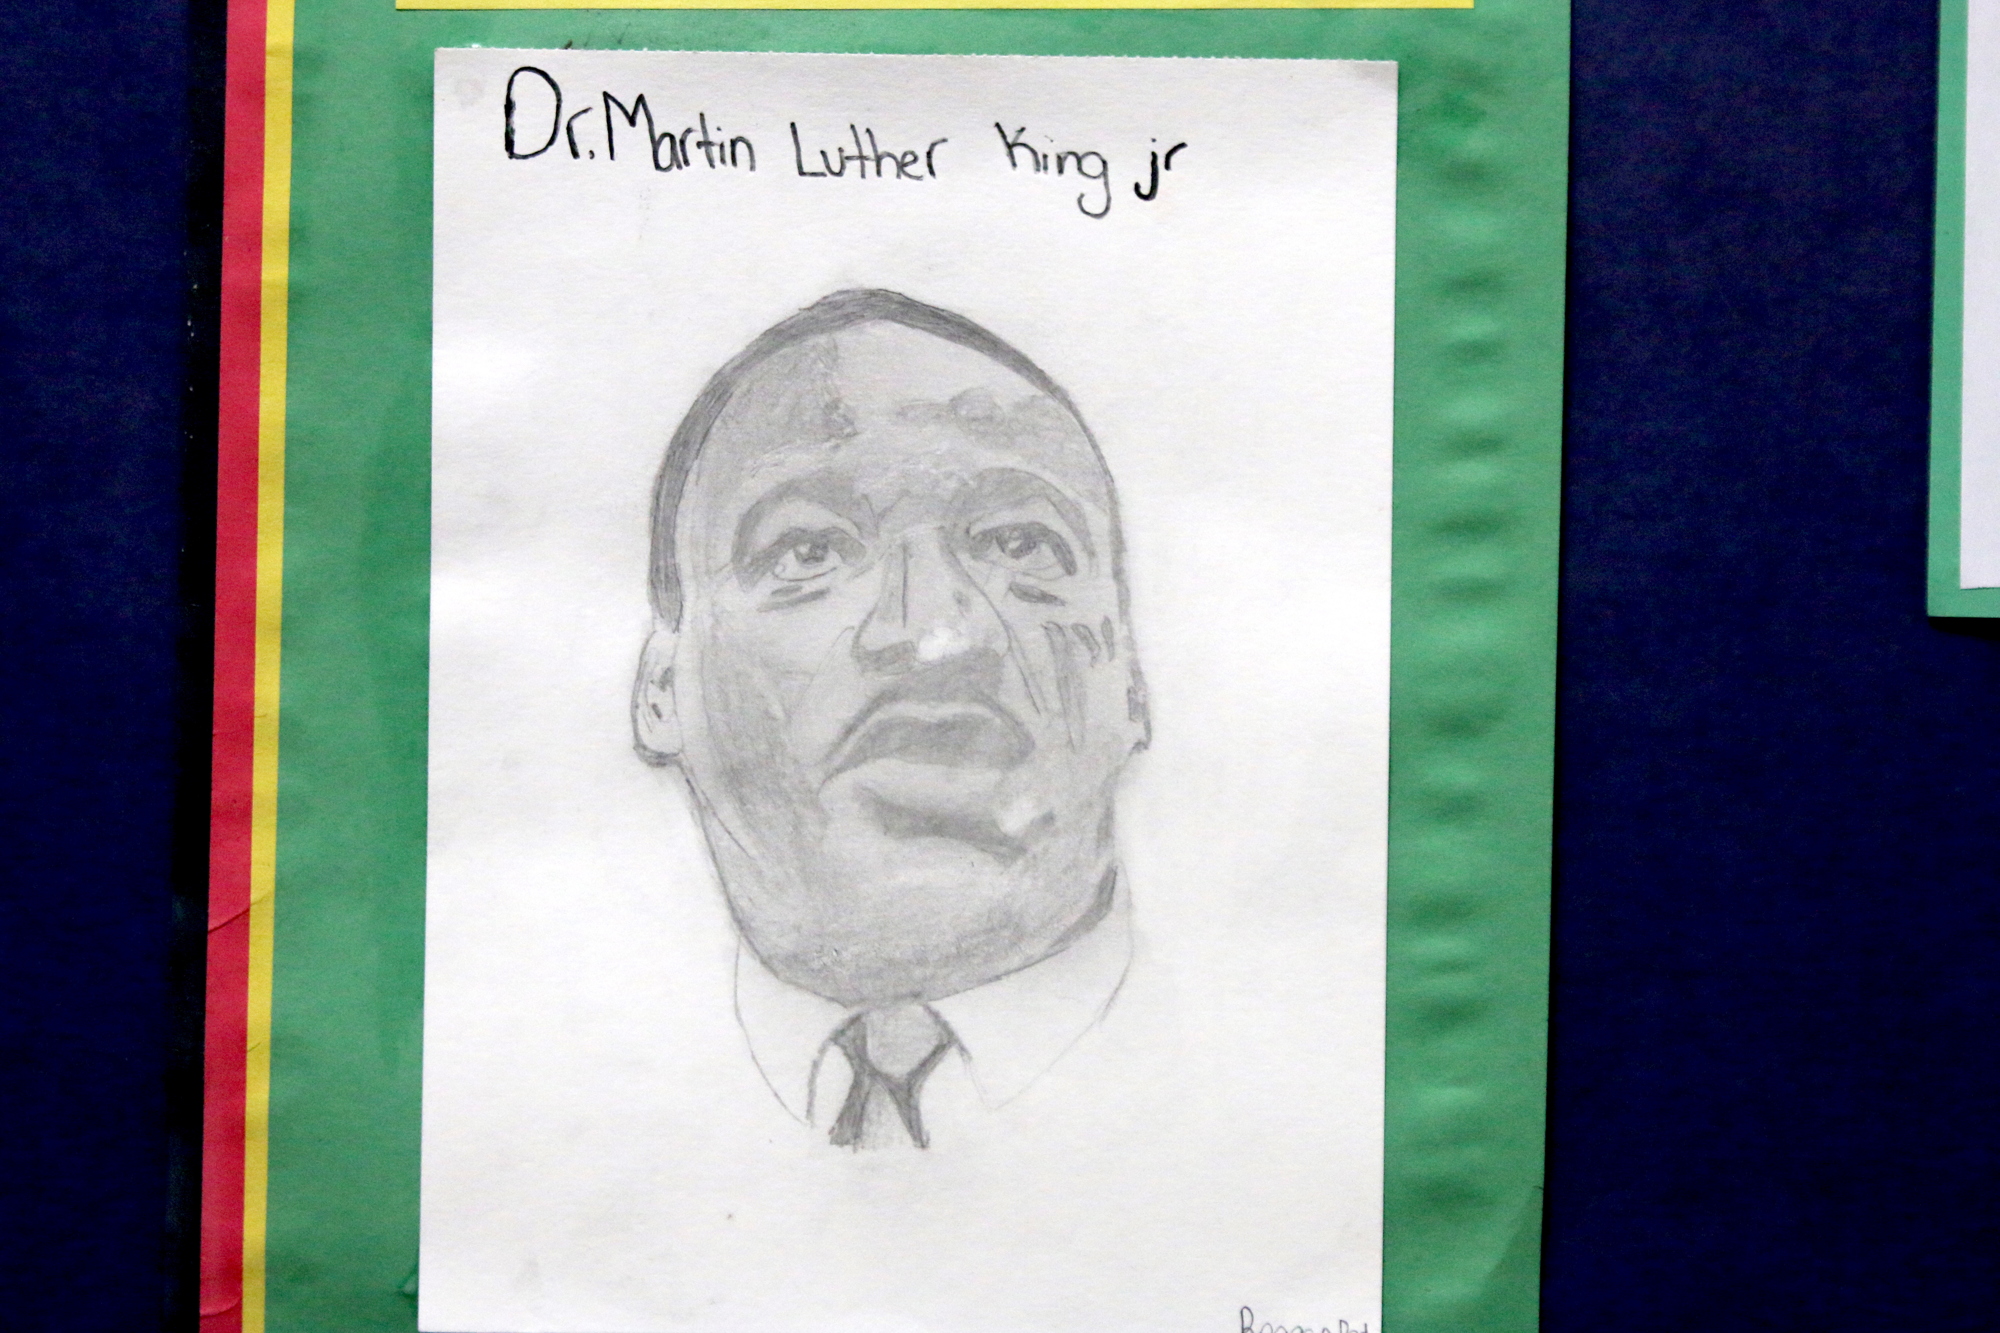 Reagan Rodriguez drew this sketch of Martin Luther King Jr. Photo by Brent Woronoff